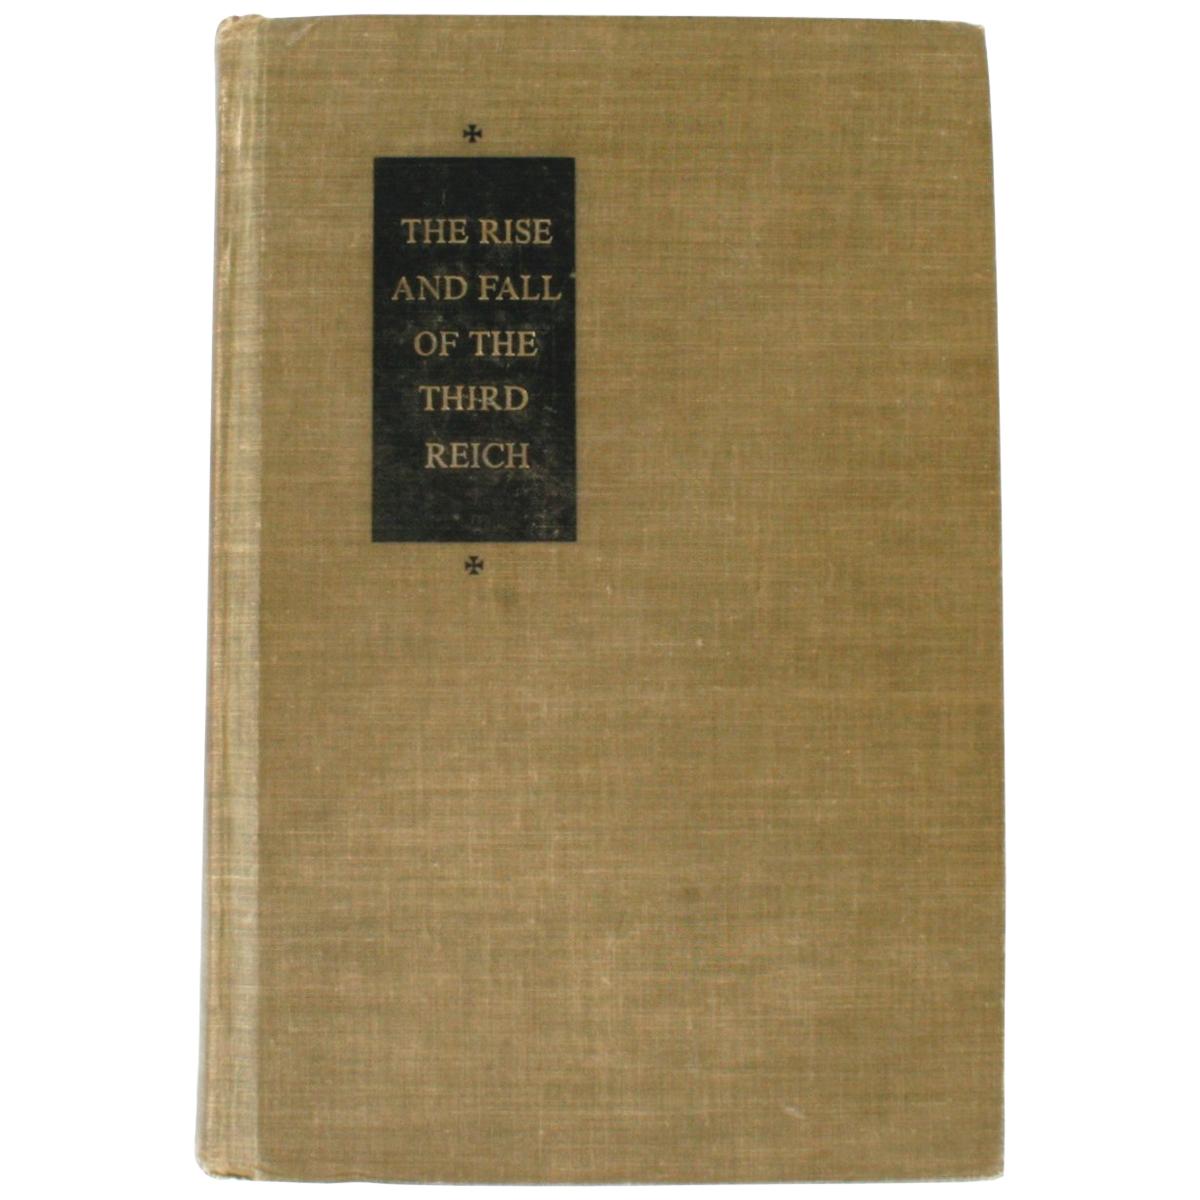 "The Rise and Fall of the Third Reich" Book by William L. Shirer